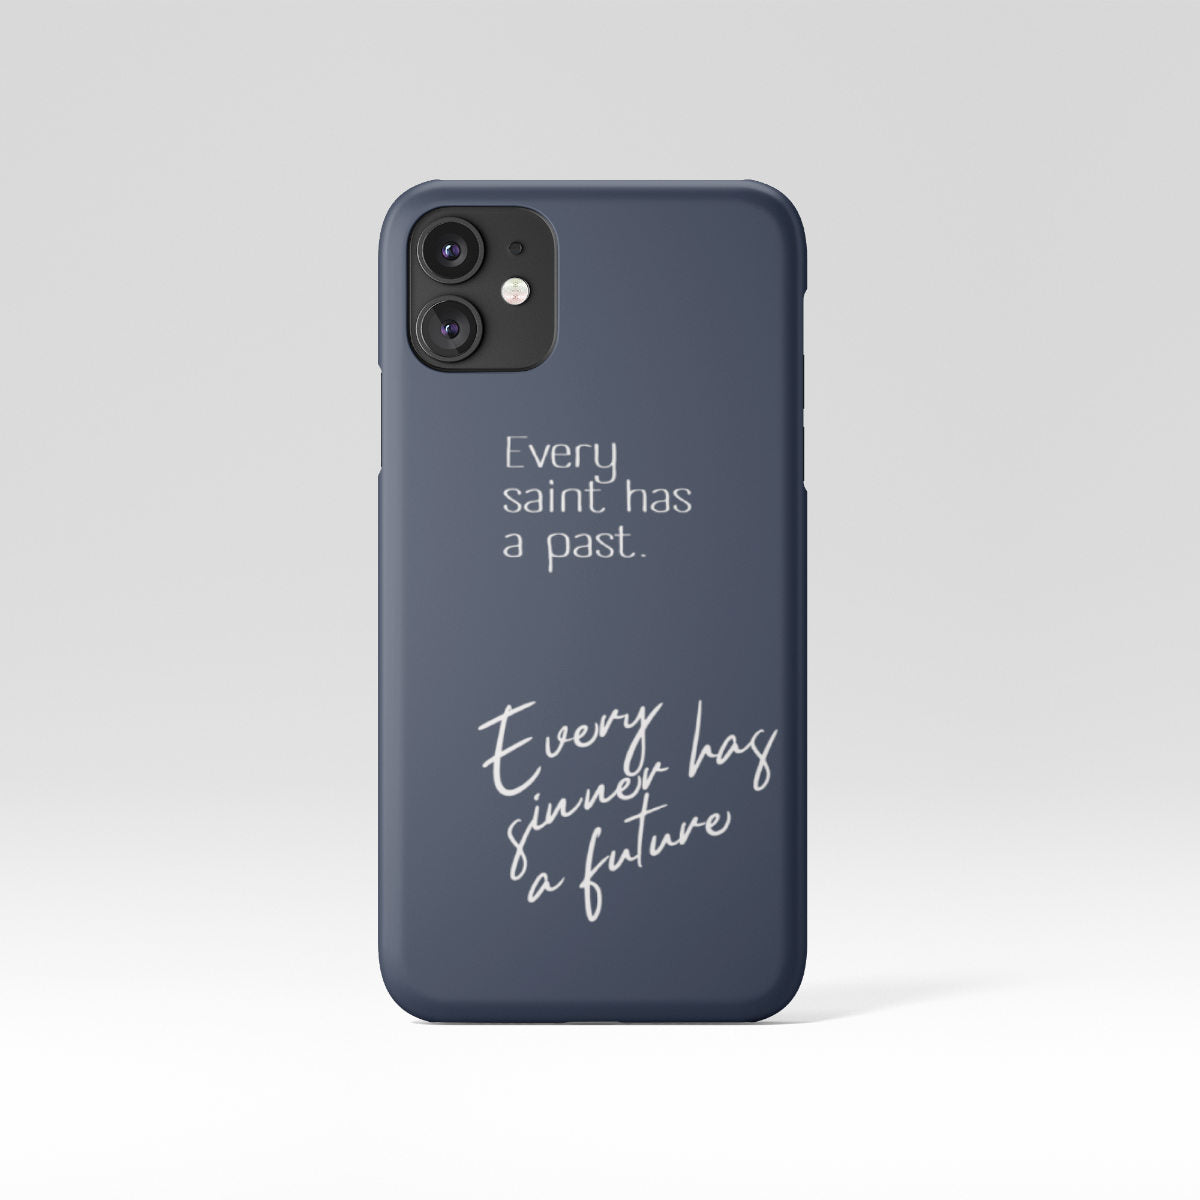 Every Saint has a past Phone Case